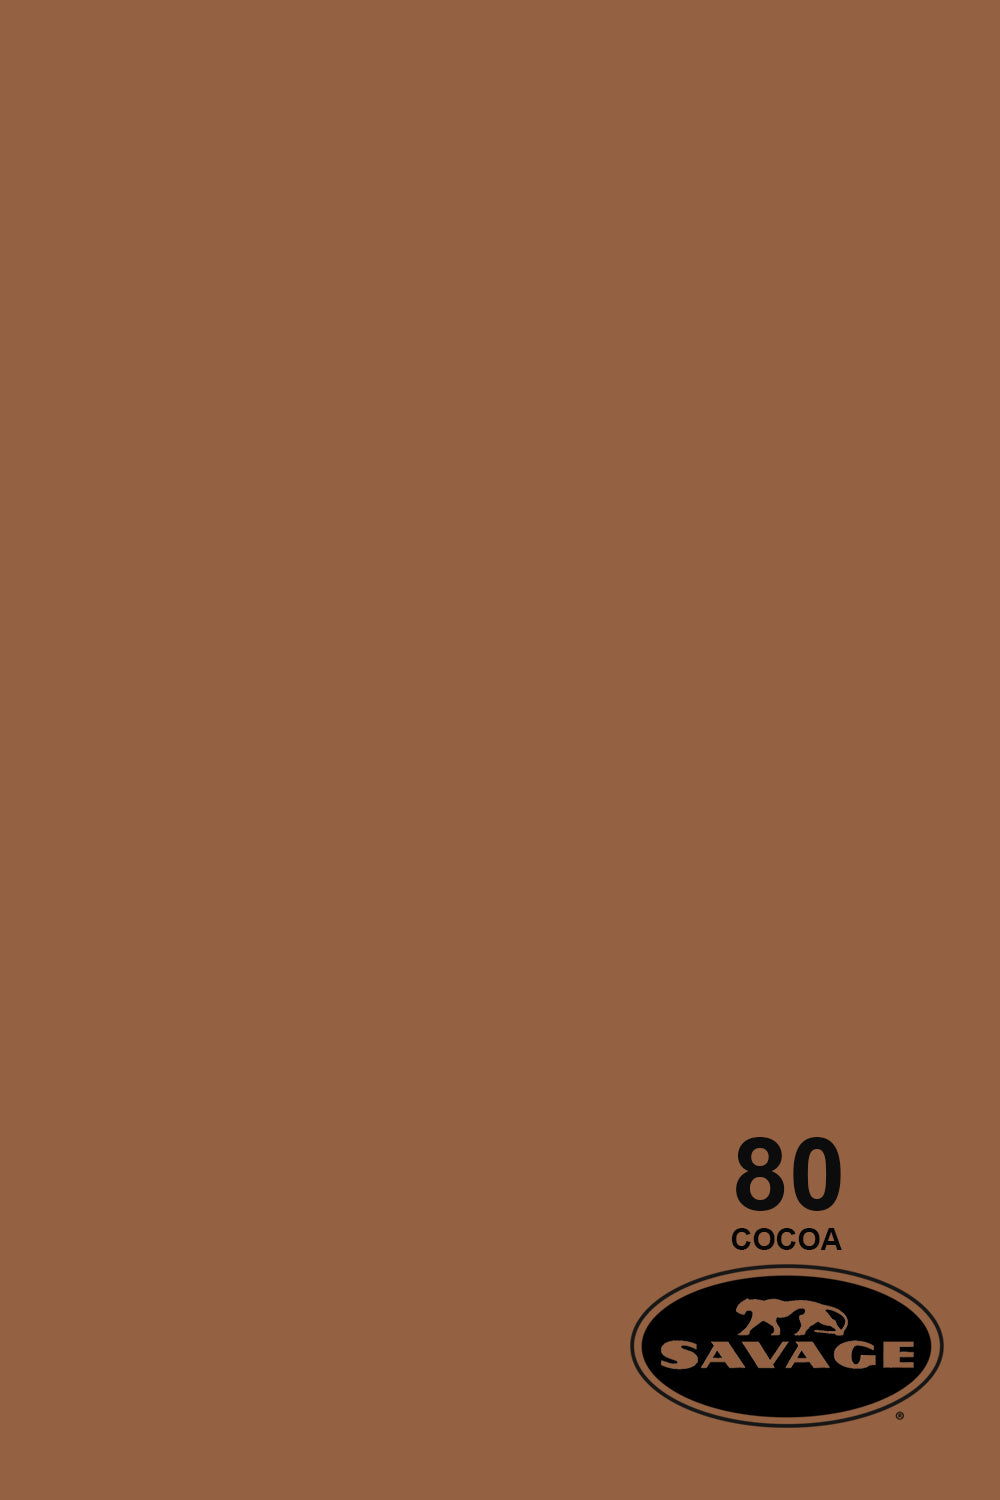 Savage Cocoa Seamless Paper Background